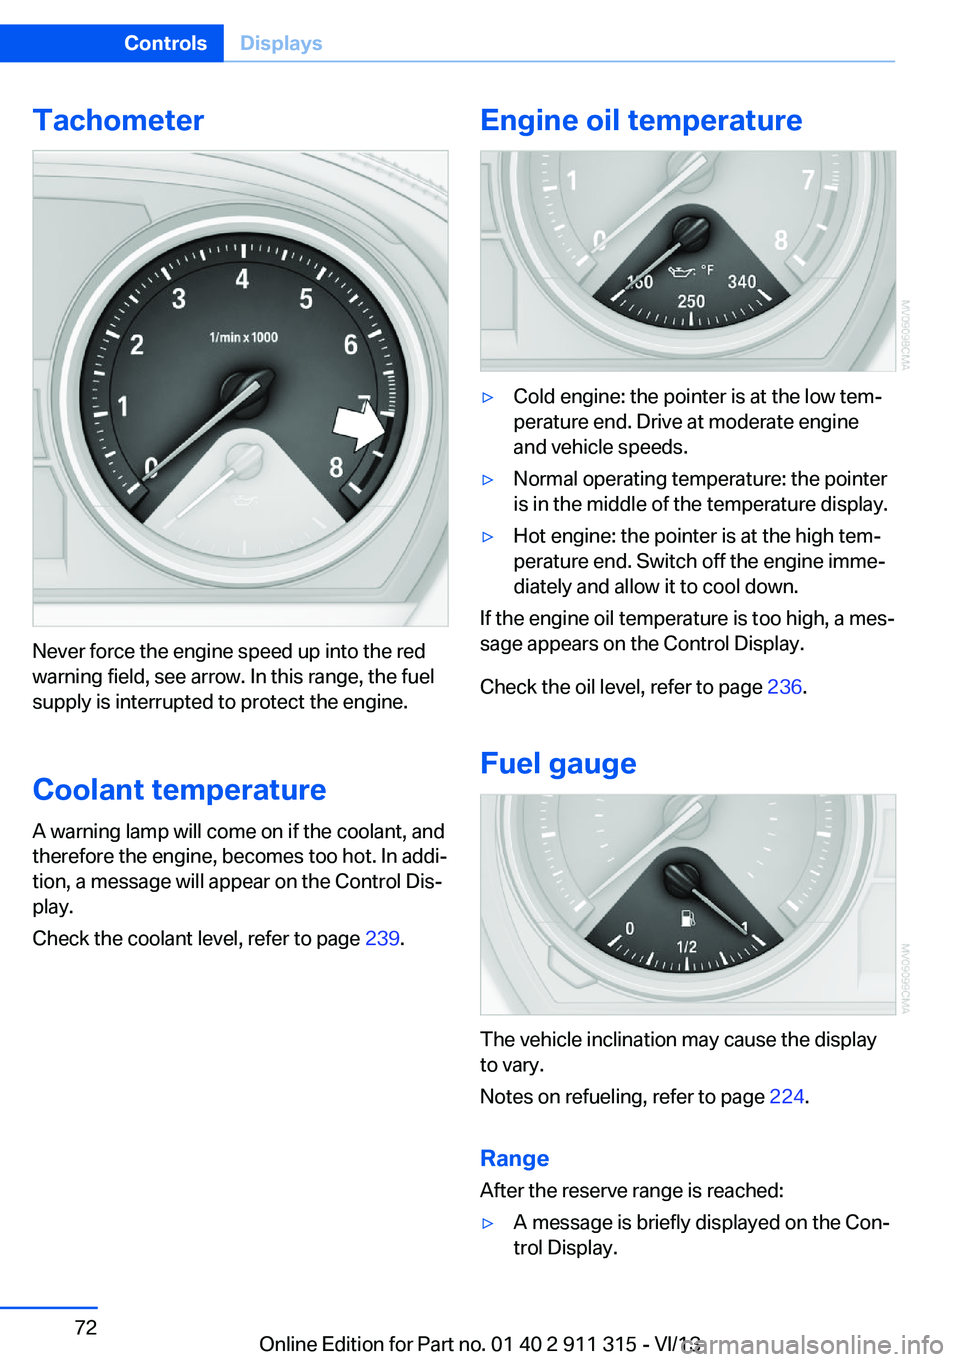 BMW Z4 SDRIVE35I 2014  Owners Manual Tachometer
Never force the engine speed up into the red
warning field, see arrow. In this range, the fuel
supply is interrupted to protect the engine.
Coolant temperature A warning lamp will come on i